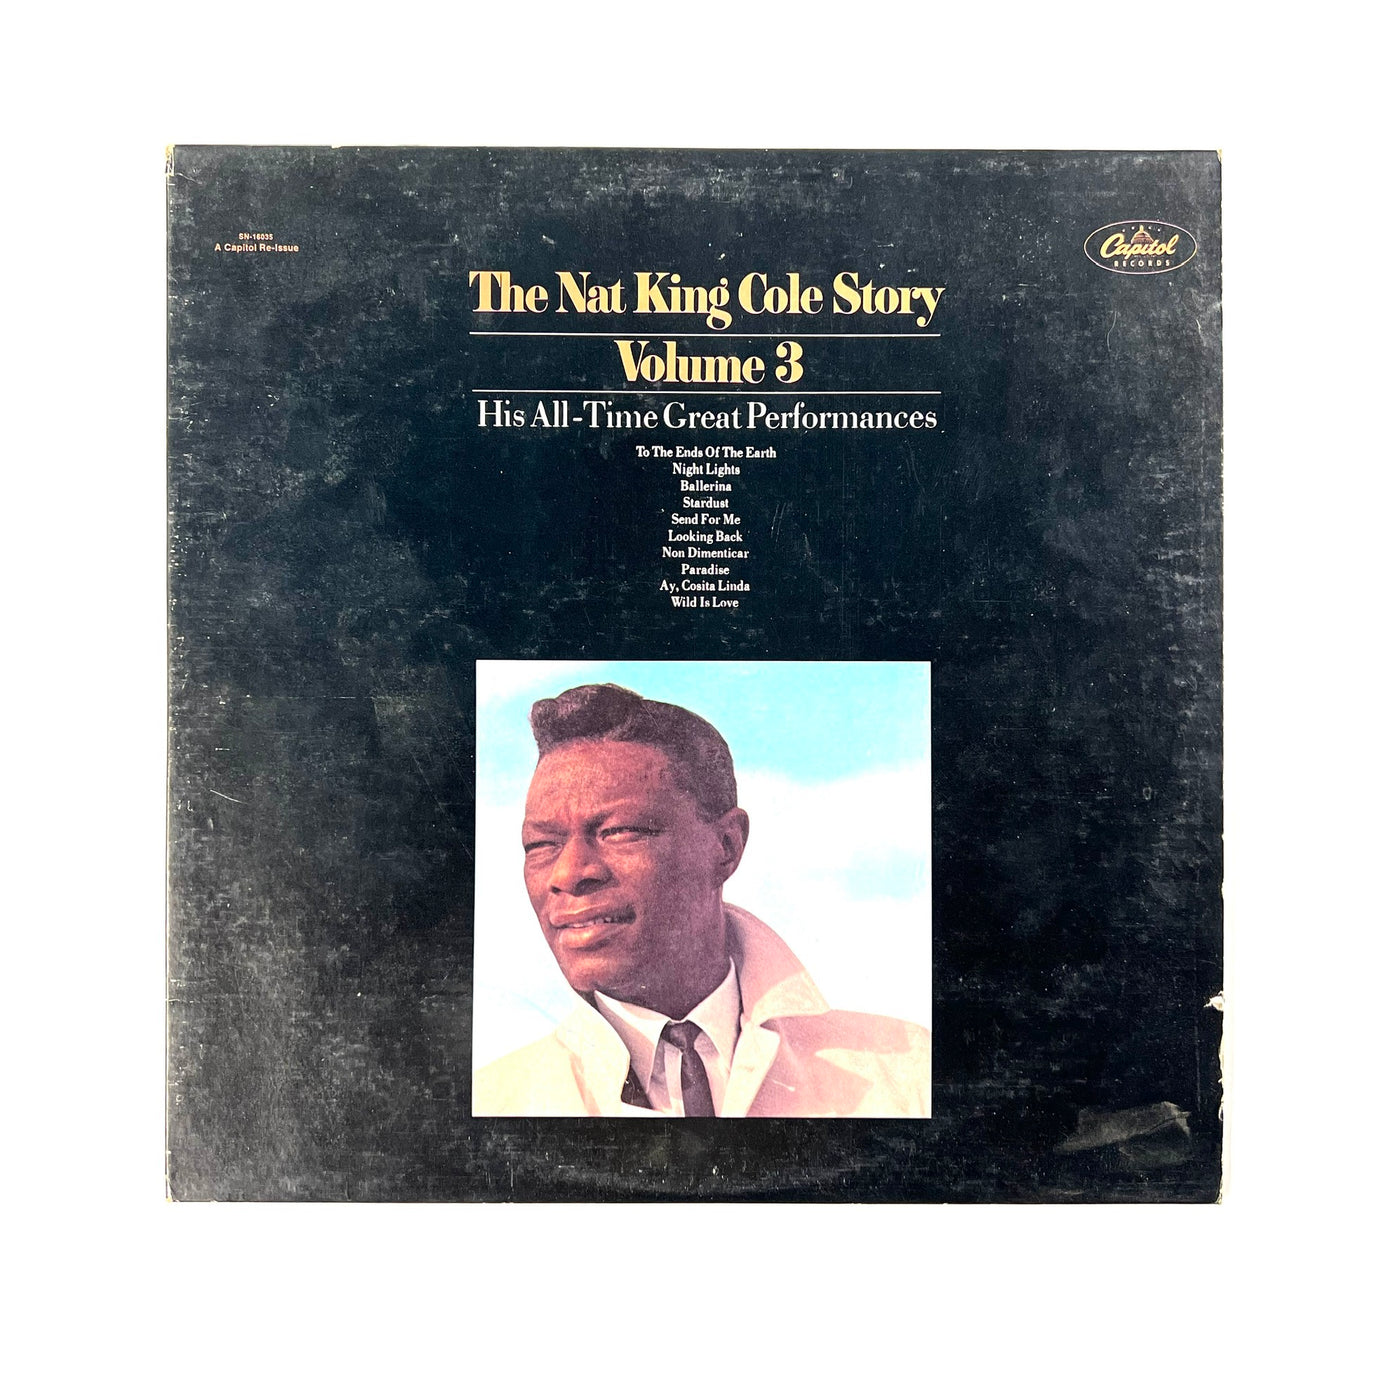 Nat King Cole - The Nat King Cole Story: Volume 3